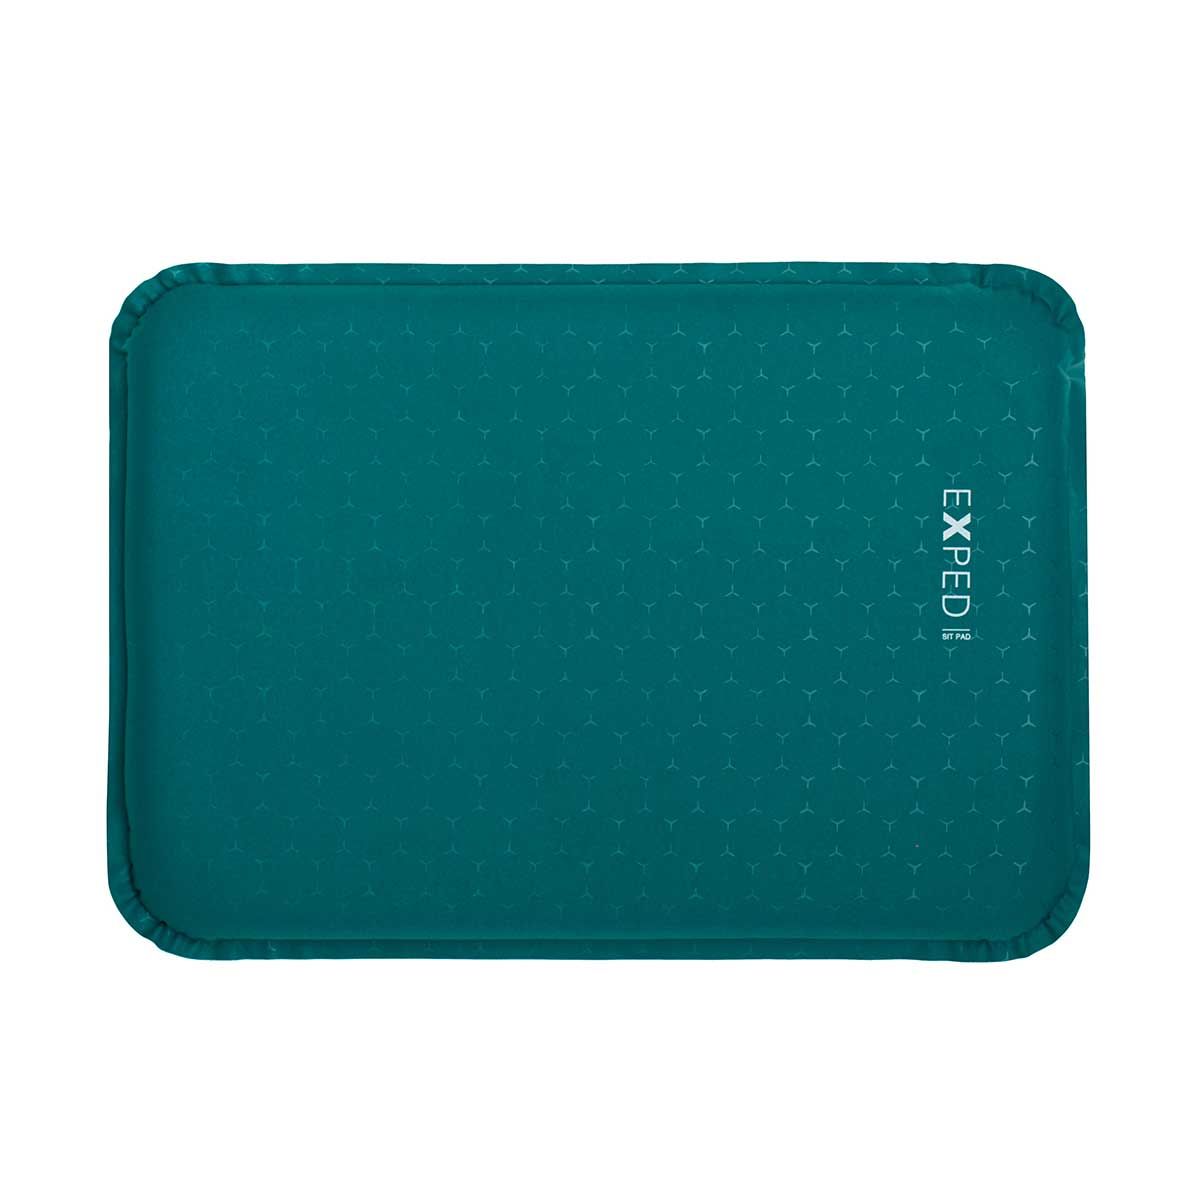 Exped self-inflating sit pad